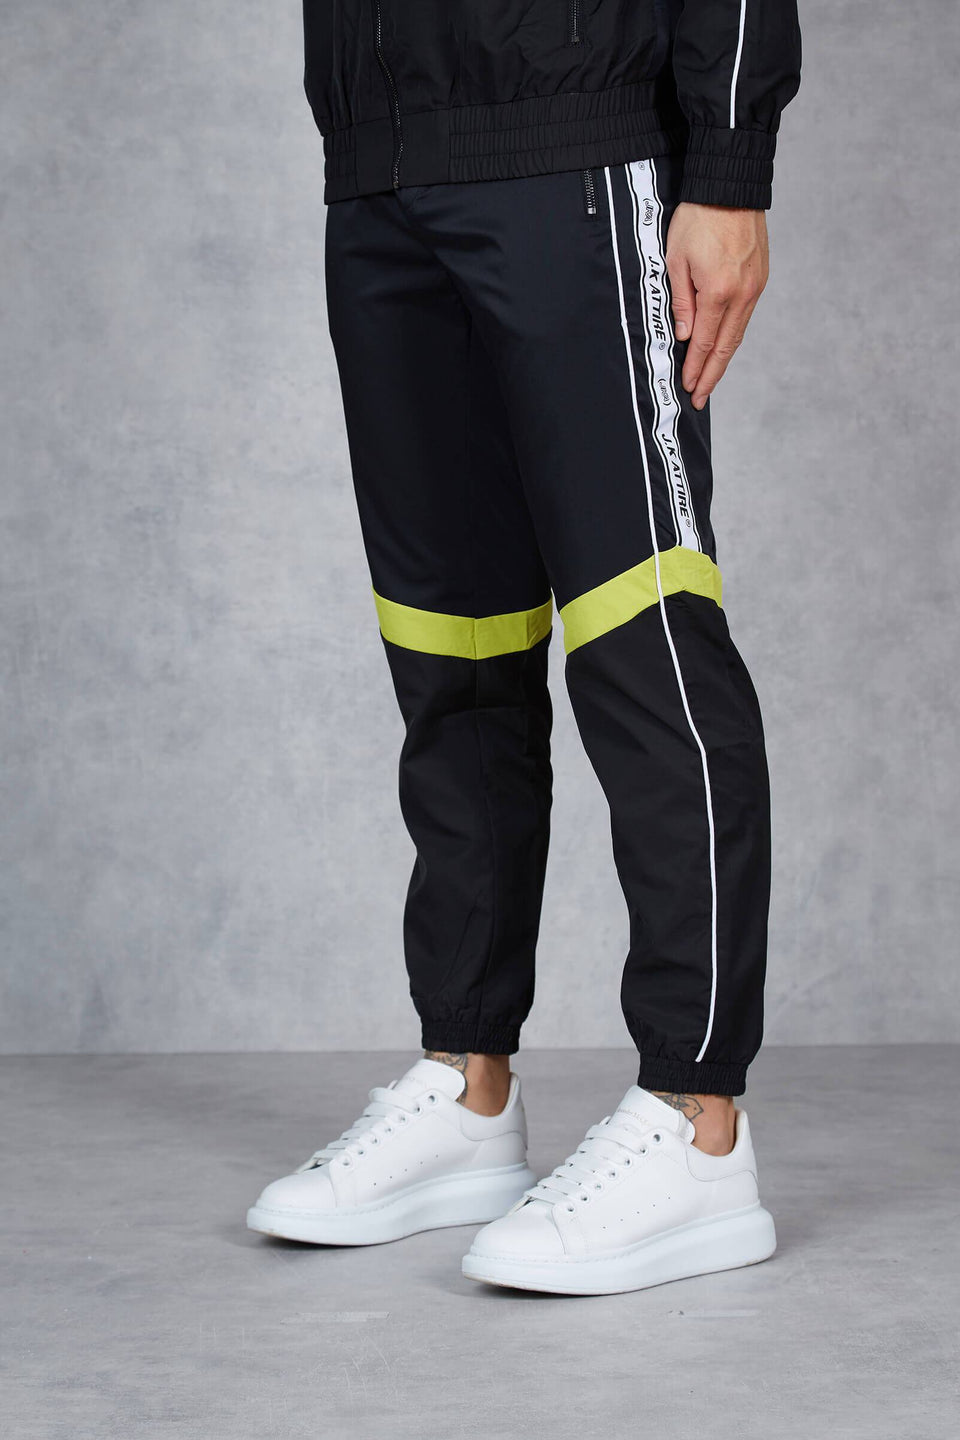 Section Retro Taped Jogging Pant - Neon/Black